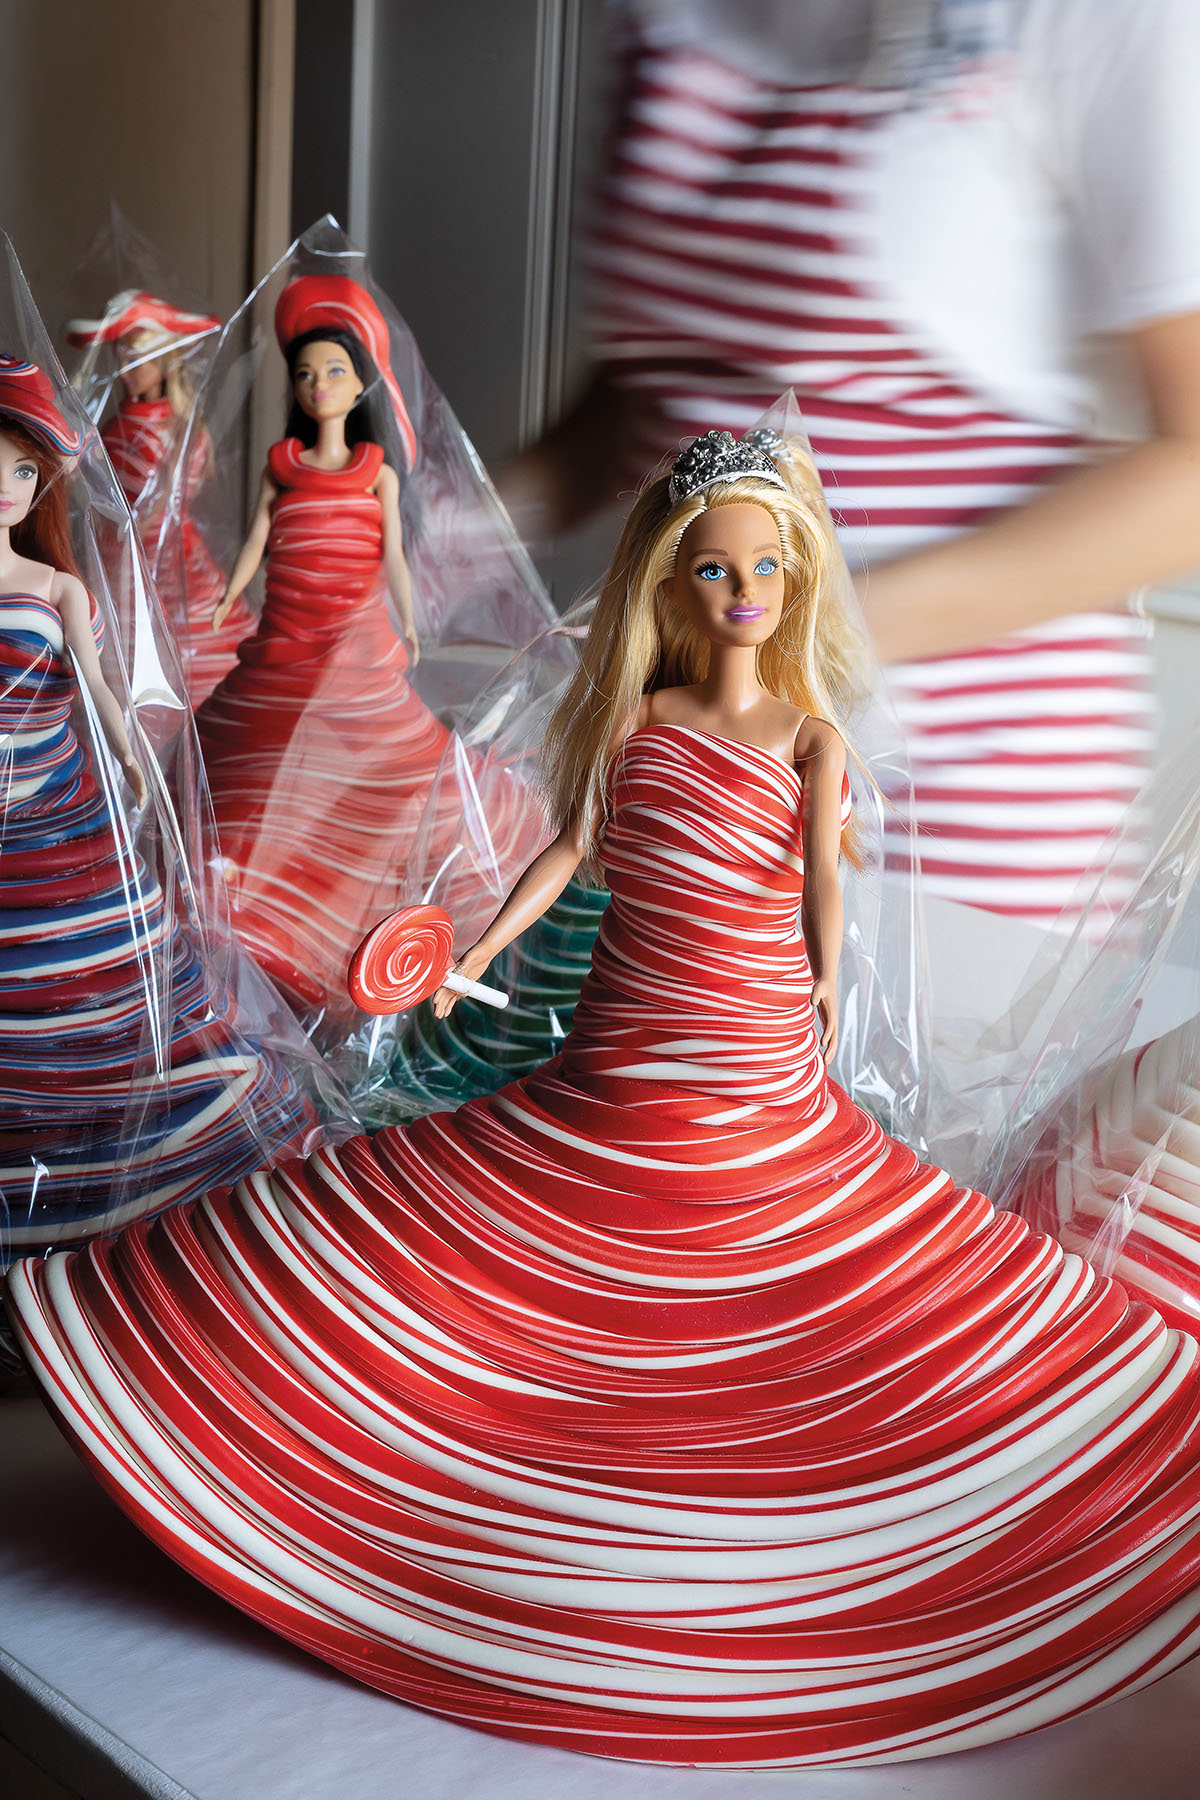 A Barbie doll with blonde hair wrapped in a red and white candy dress